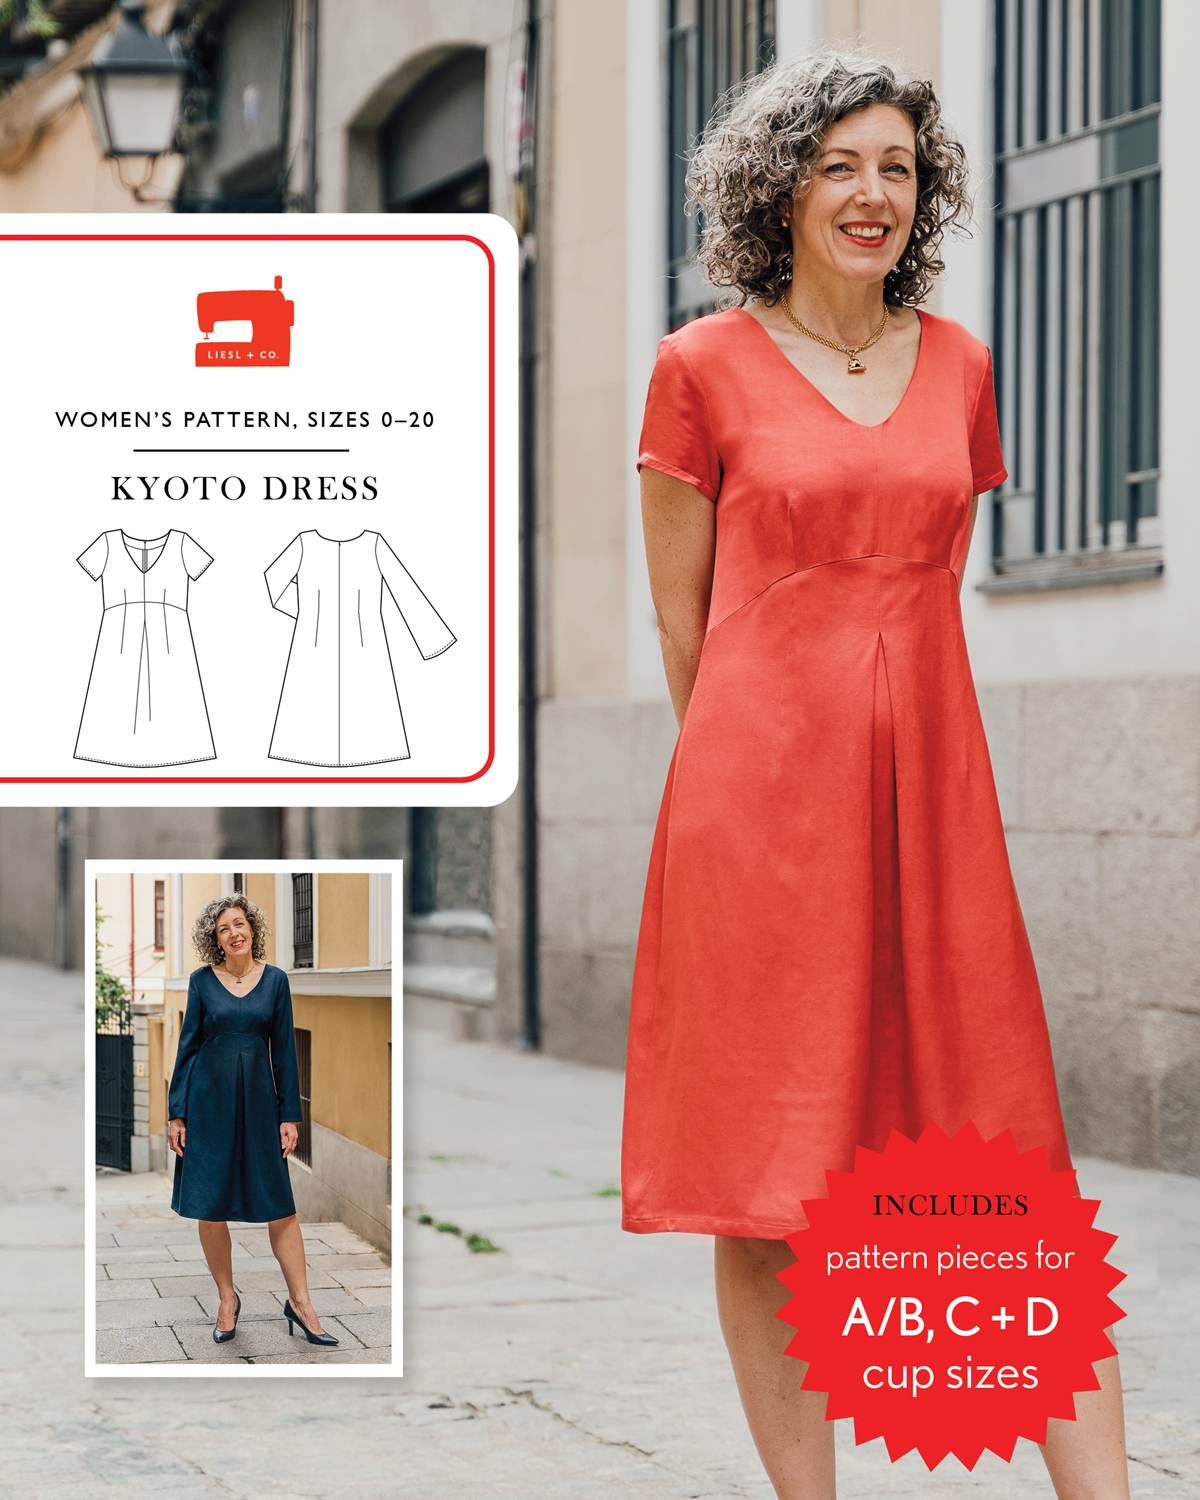 DIY Front Zipper Dress from Any Bodice Sewing Pattern - Sew in Love